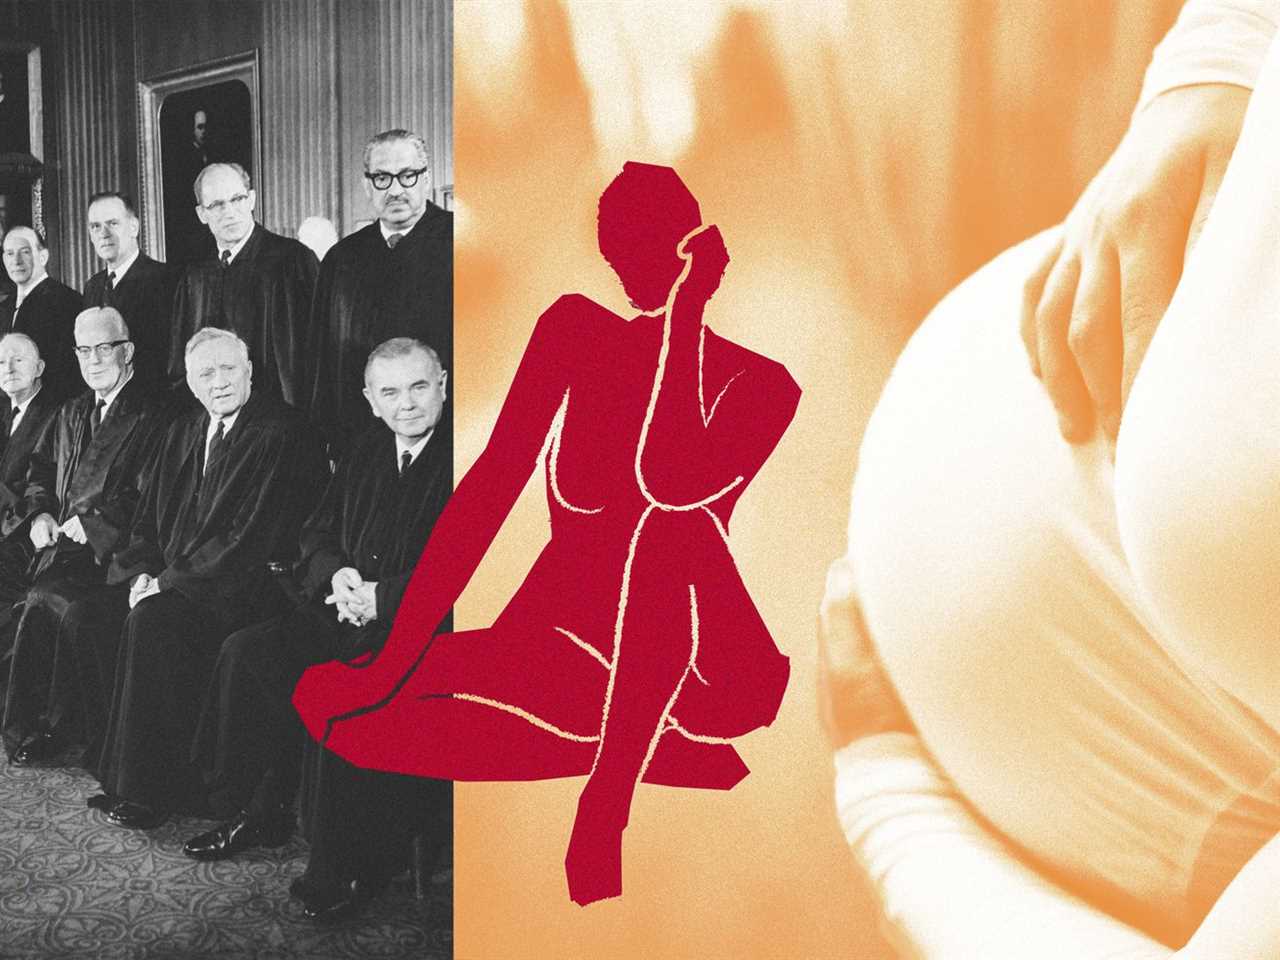 Photo collage of the Supreme Court justices of 50 years ago, a pregnant belly, and the outline of a woman.